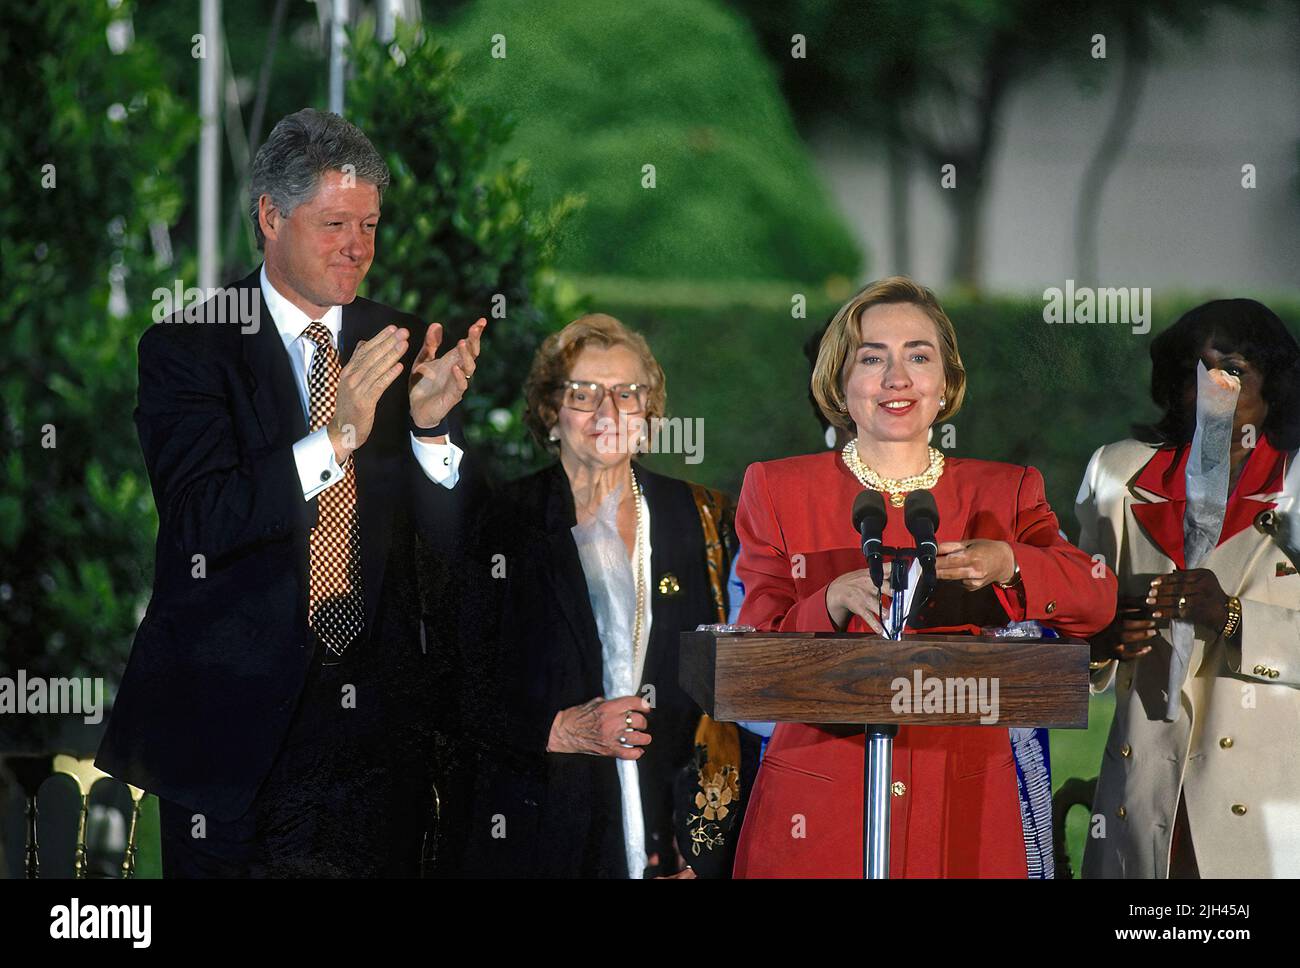 WASHINGTON DC - MAY 6, 1994 President Bill Clinton applauds his wife First Lady Hillary Rodham Clinton as she addresses the crowd under a tent in the Rose Garden during a Mothers Day event regarding WomenÕs Health Issues. Louise DeLauro the mother of Congresswoman Rosa Delauro (D-CT) is seen standing behind the Clintons Stock Photo